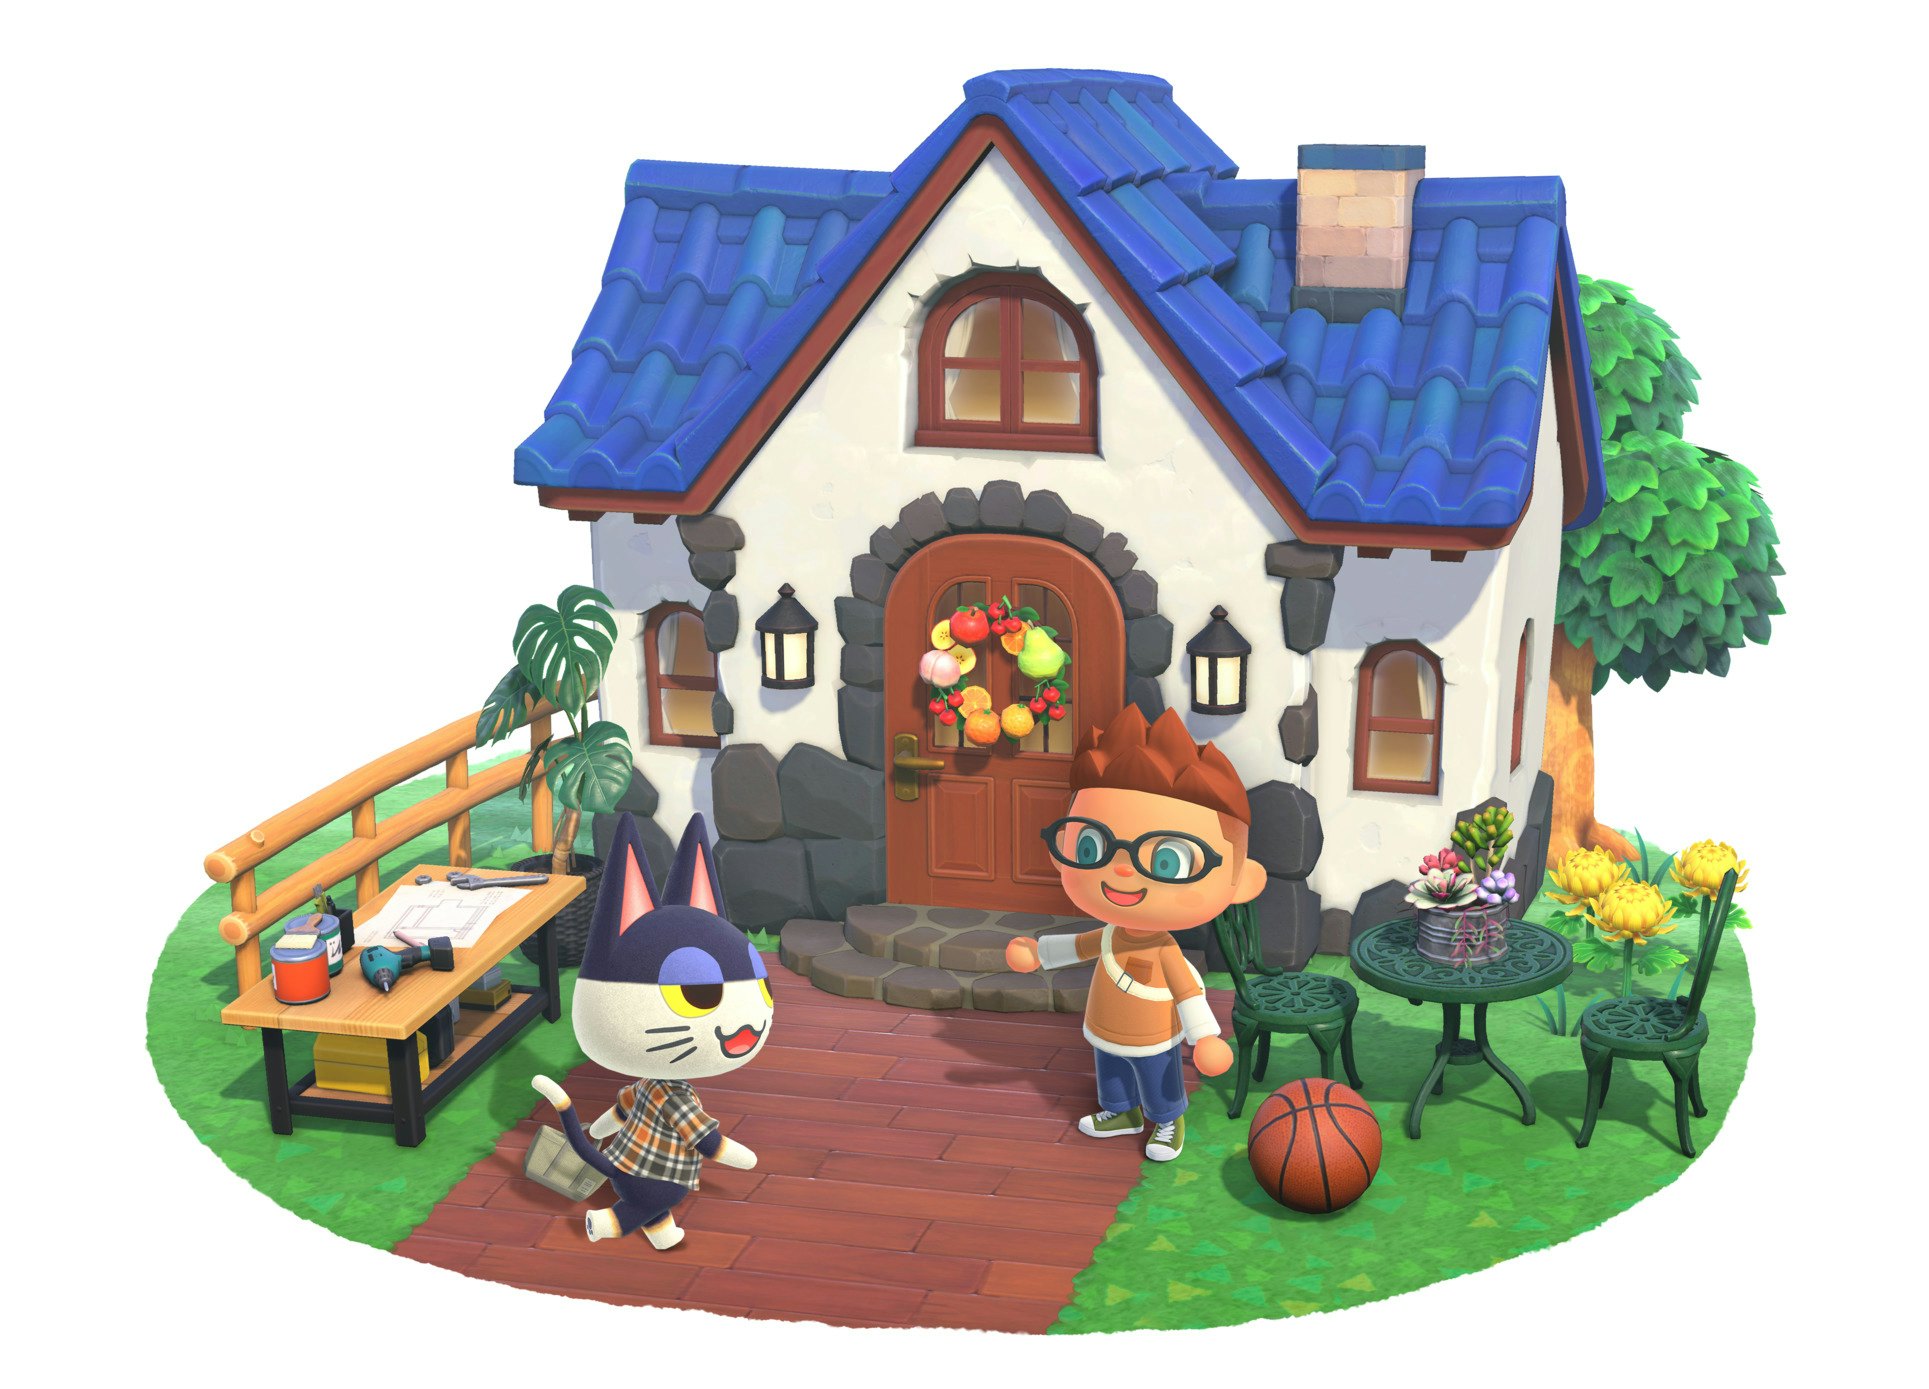 animal crossing new horizons on ps4